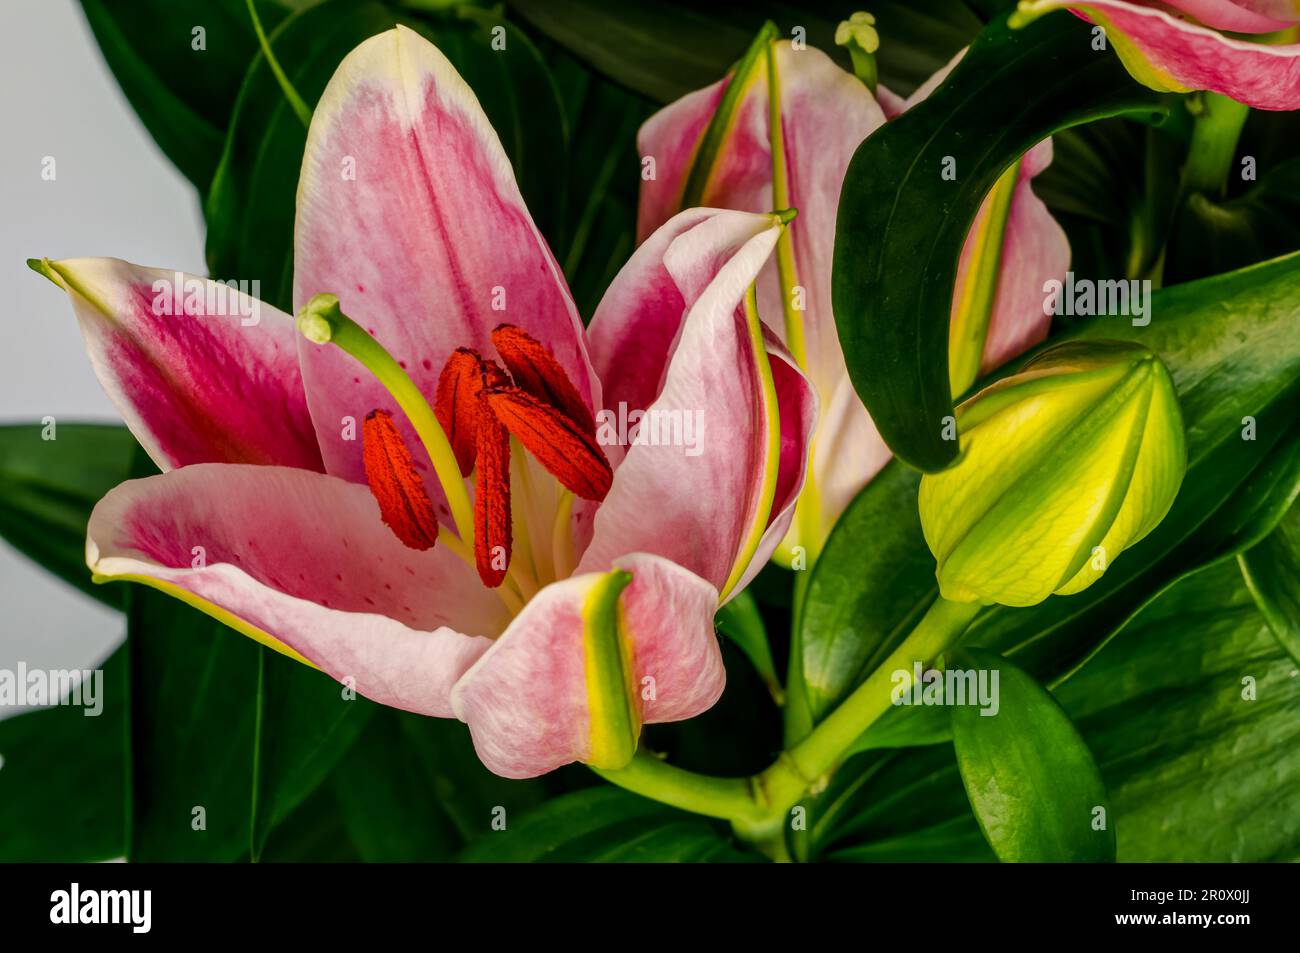 Asiatic lily,blooming colorful pink flower close up,decorative elegant petals,plant from the group of hybrids that originated from East Asian species Stock Photo